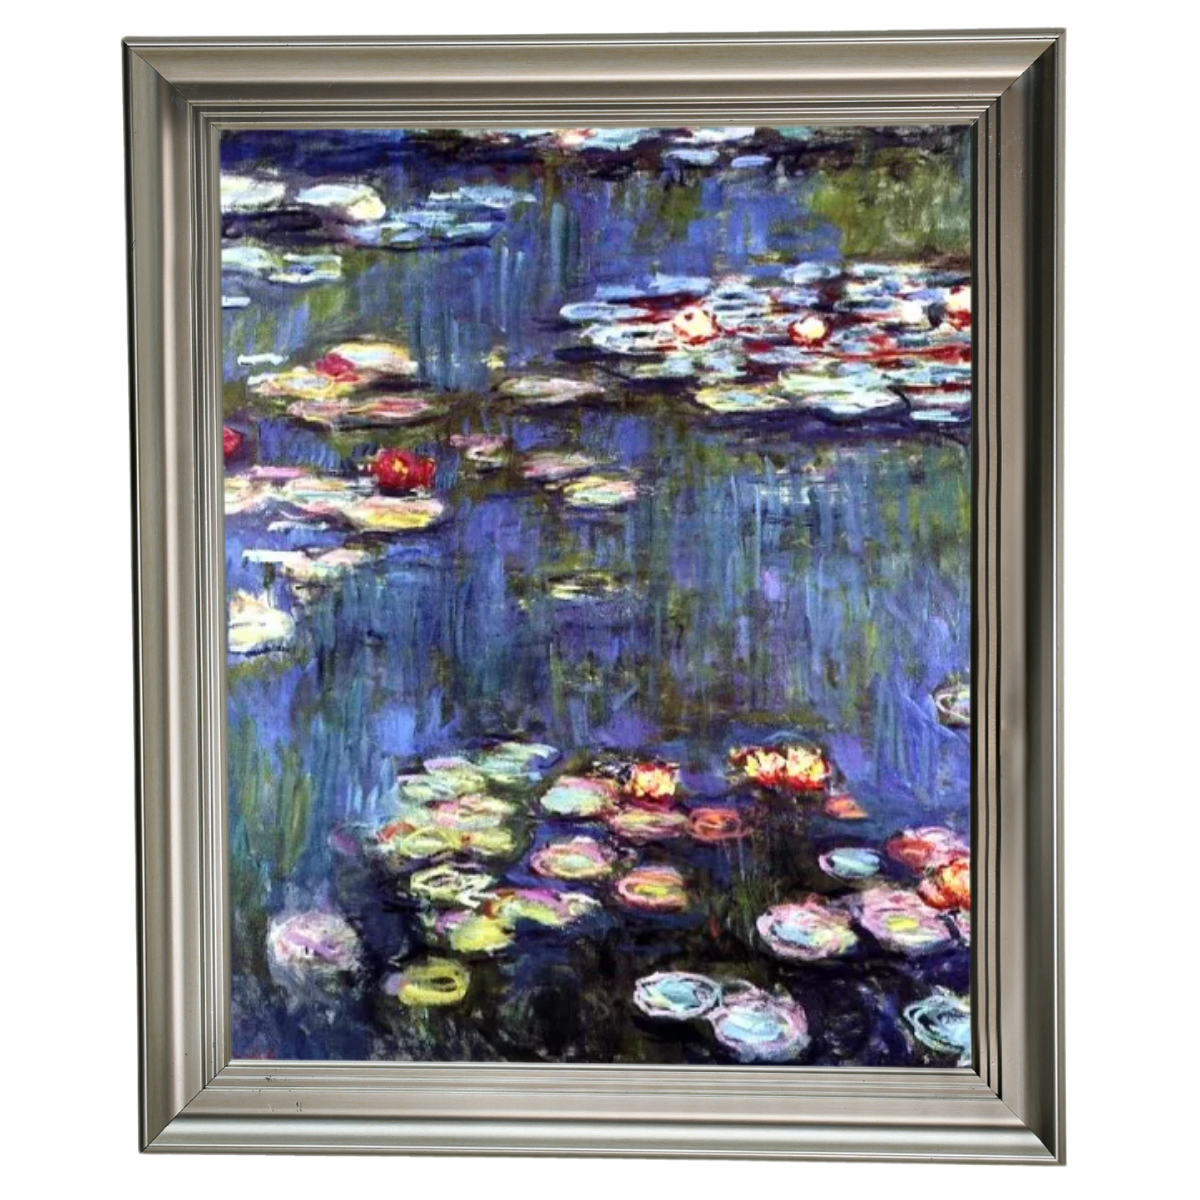 Water-Lilies 18- Metal Flower Wall Art For Living Room